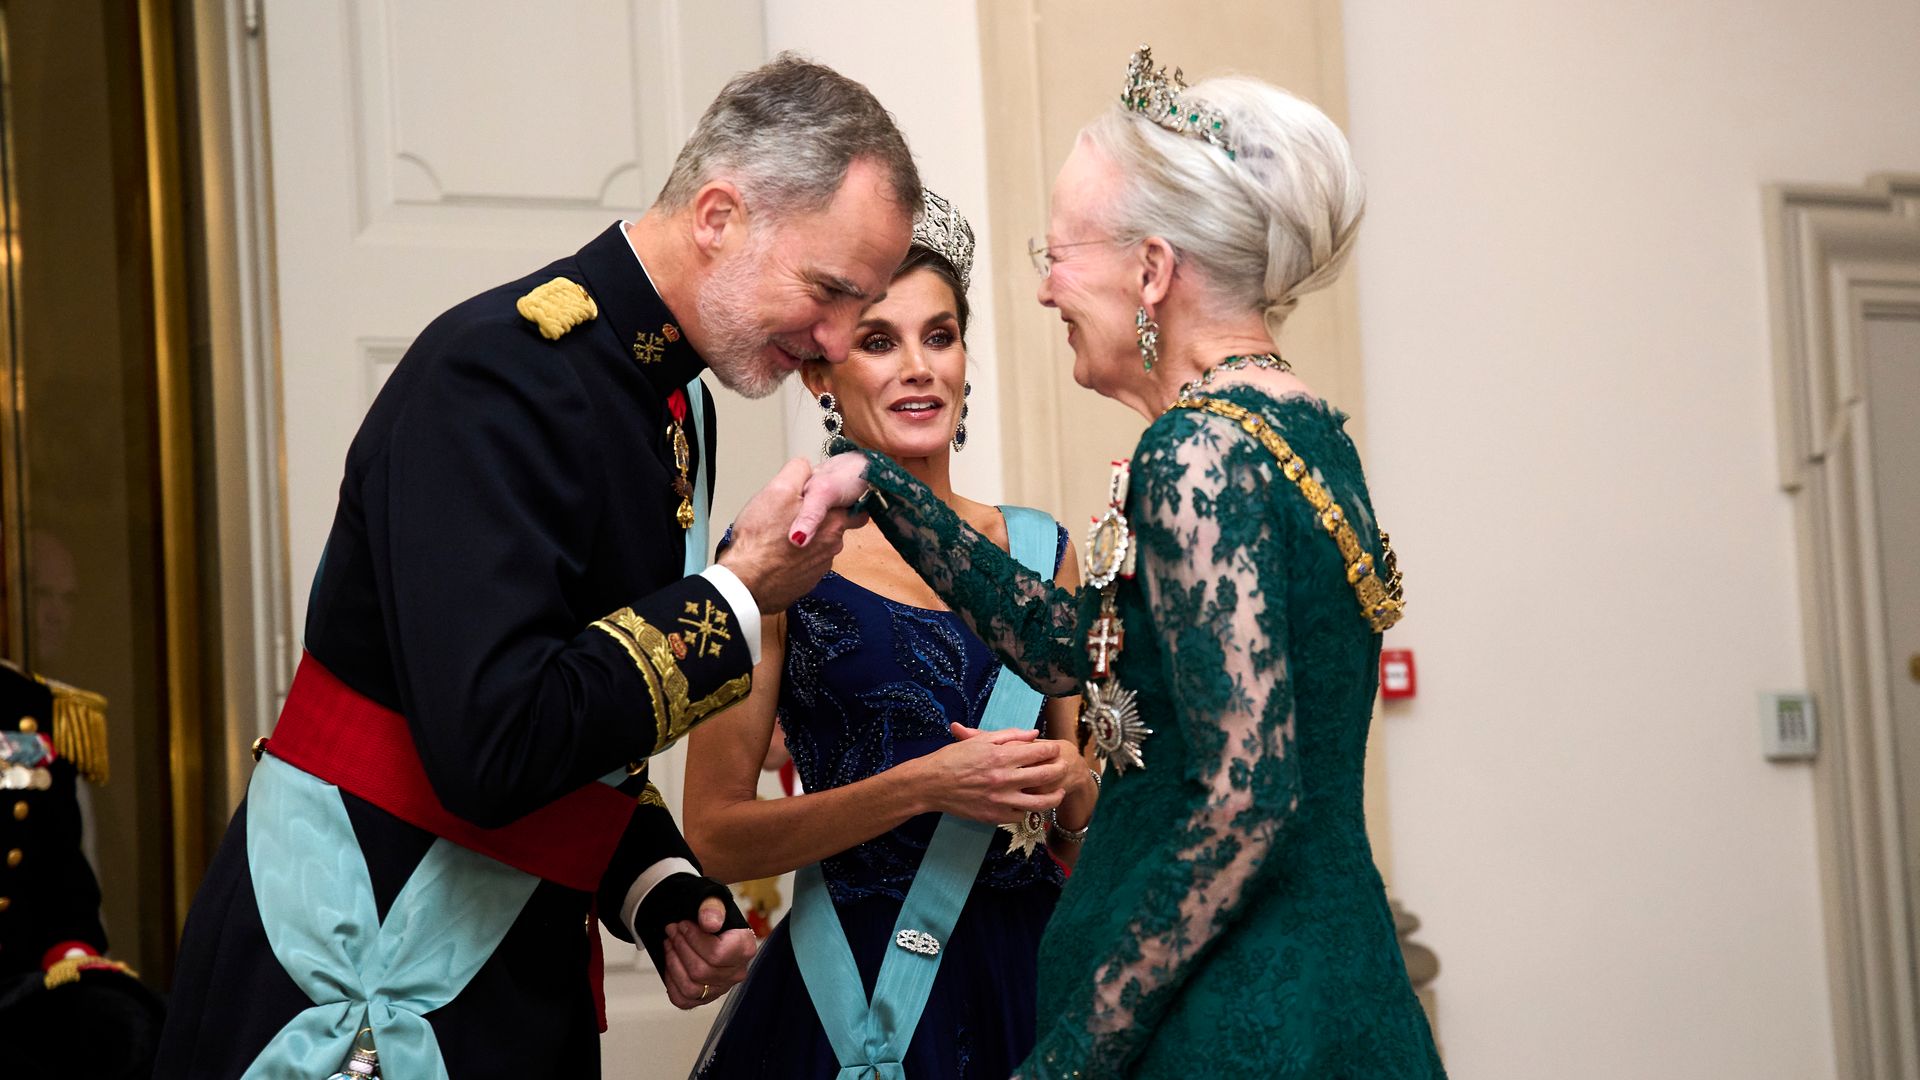 Queen Margrethe of Denmark also dazzled in a dark green gown, seen here greeting King Felipe and Queen Letizia